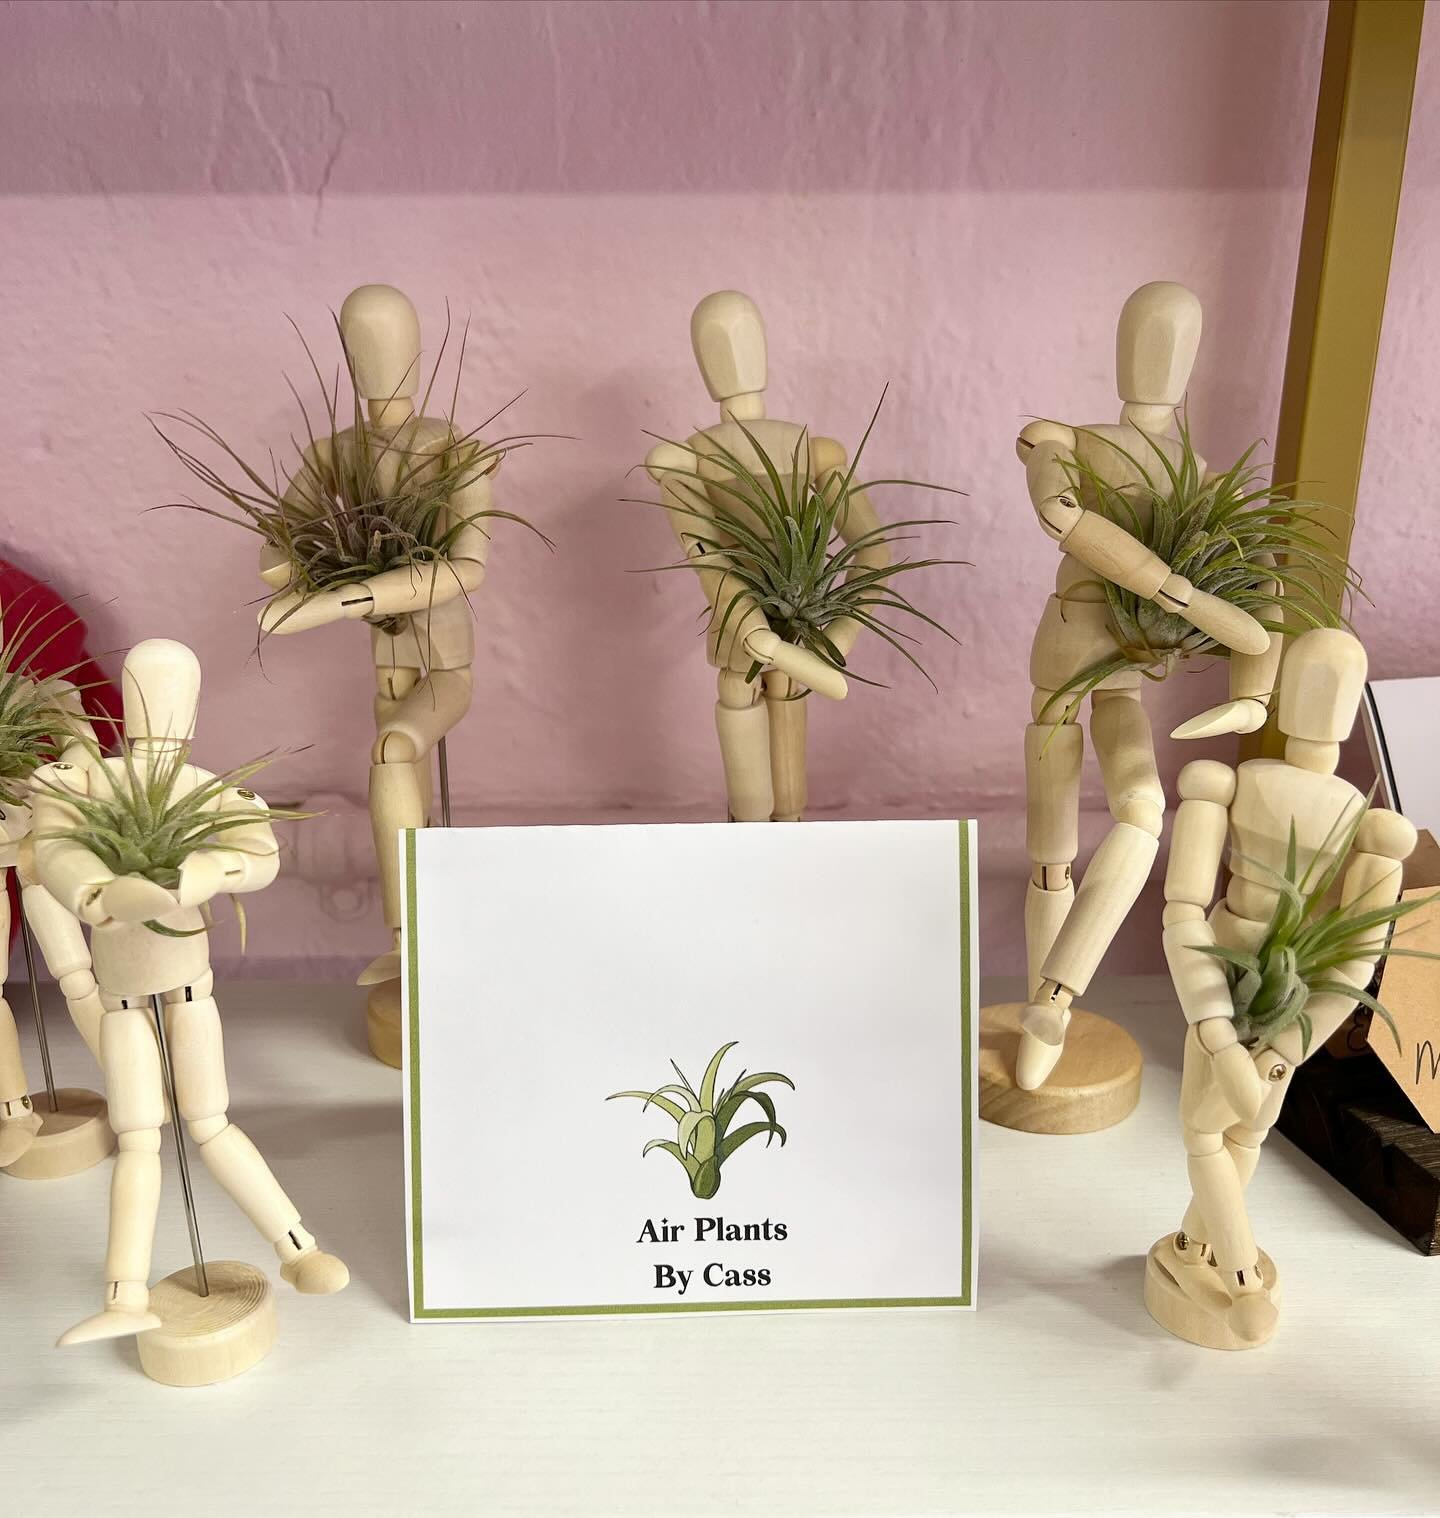 Just arrived today to our Sylva store are these adorable poseable air plant figures. So cute! 🌱